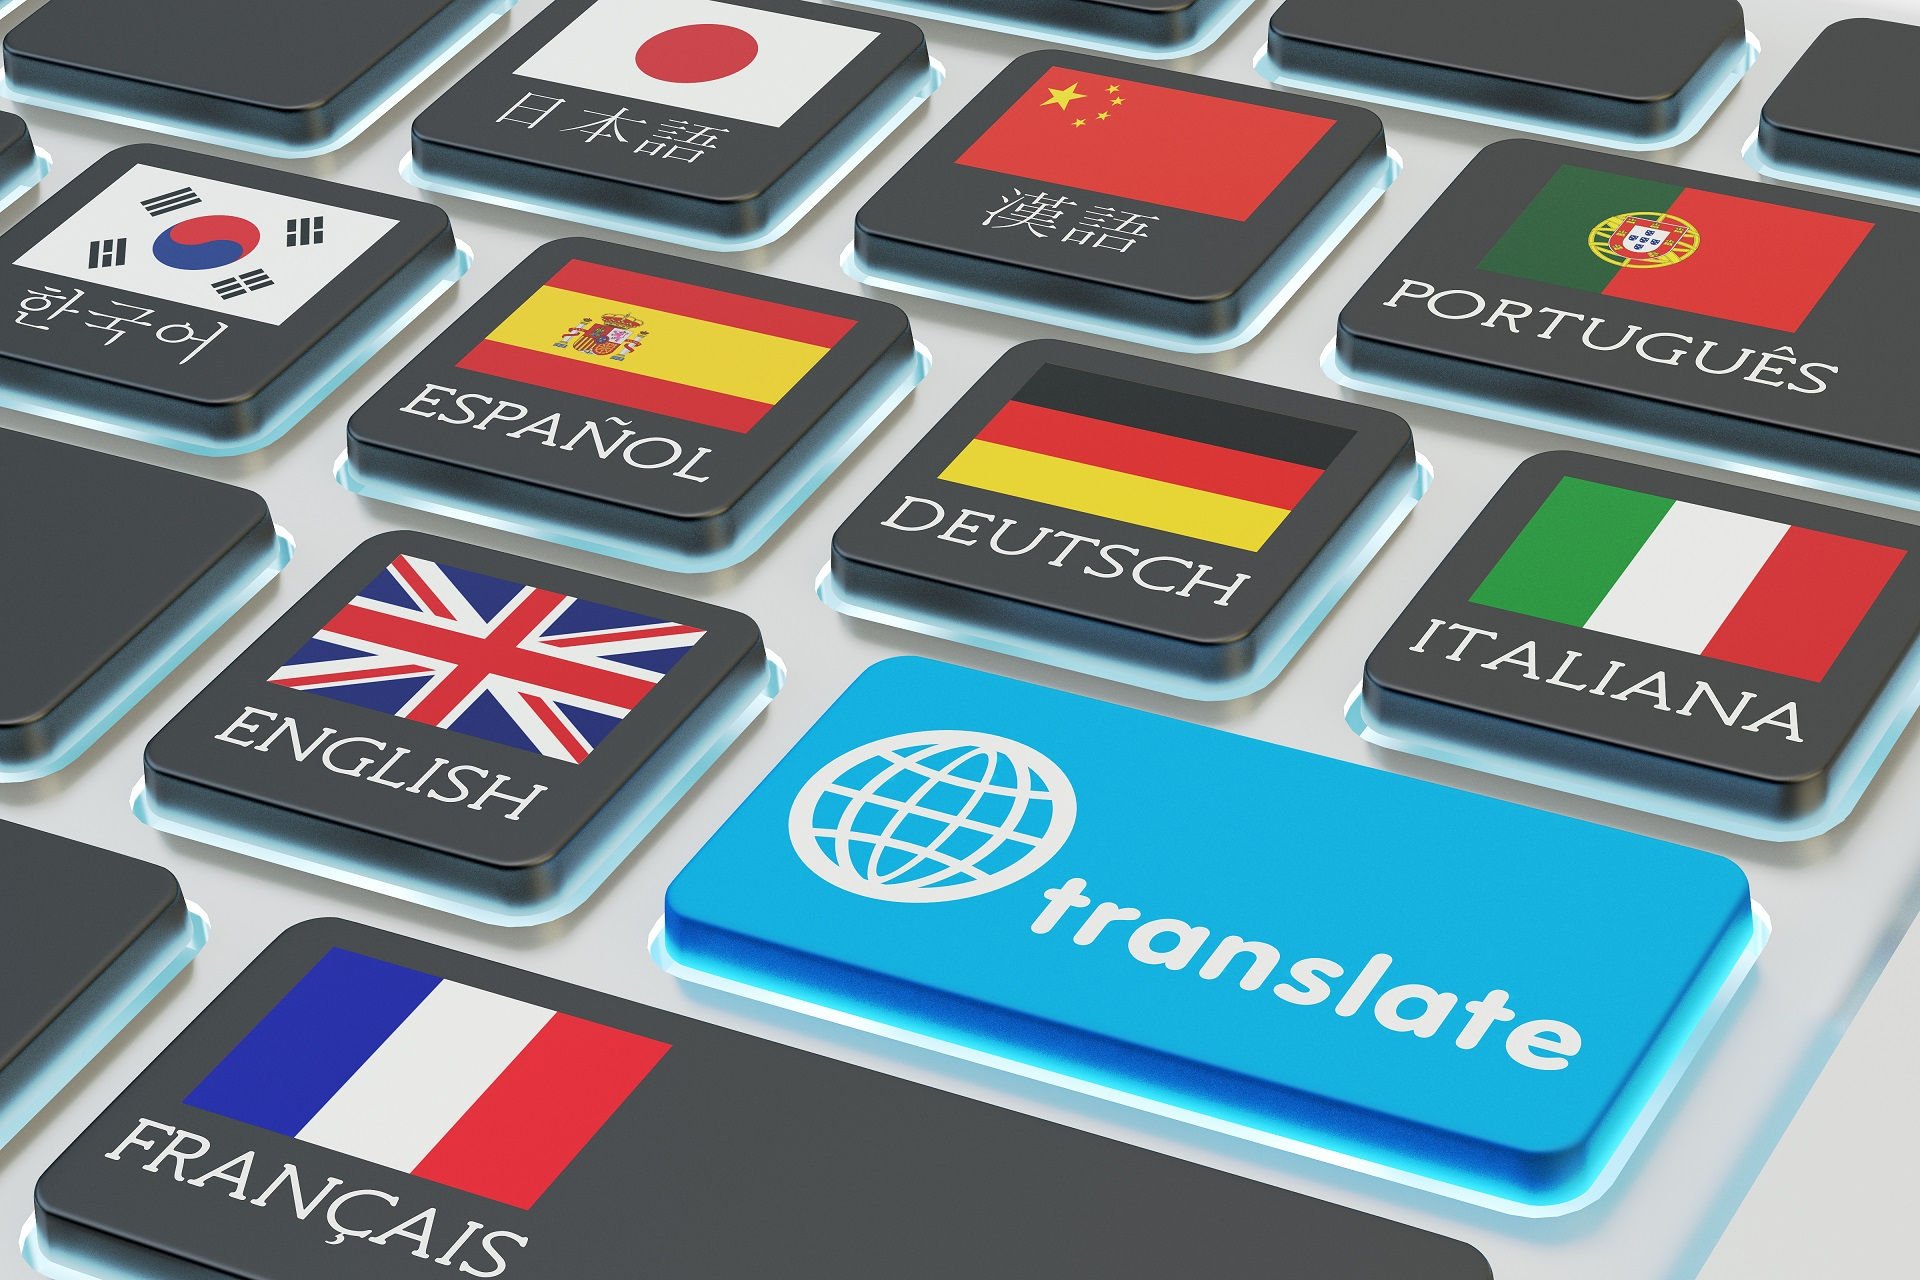 What are the best offline translation software for Windows 10